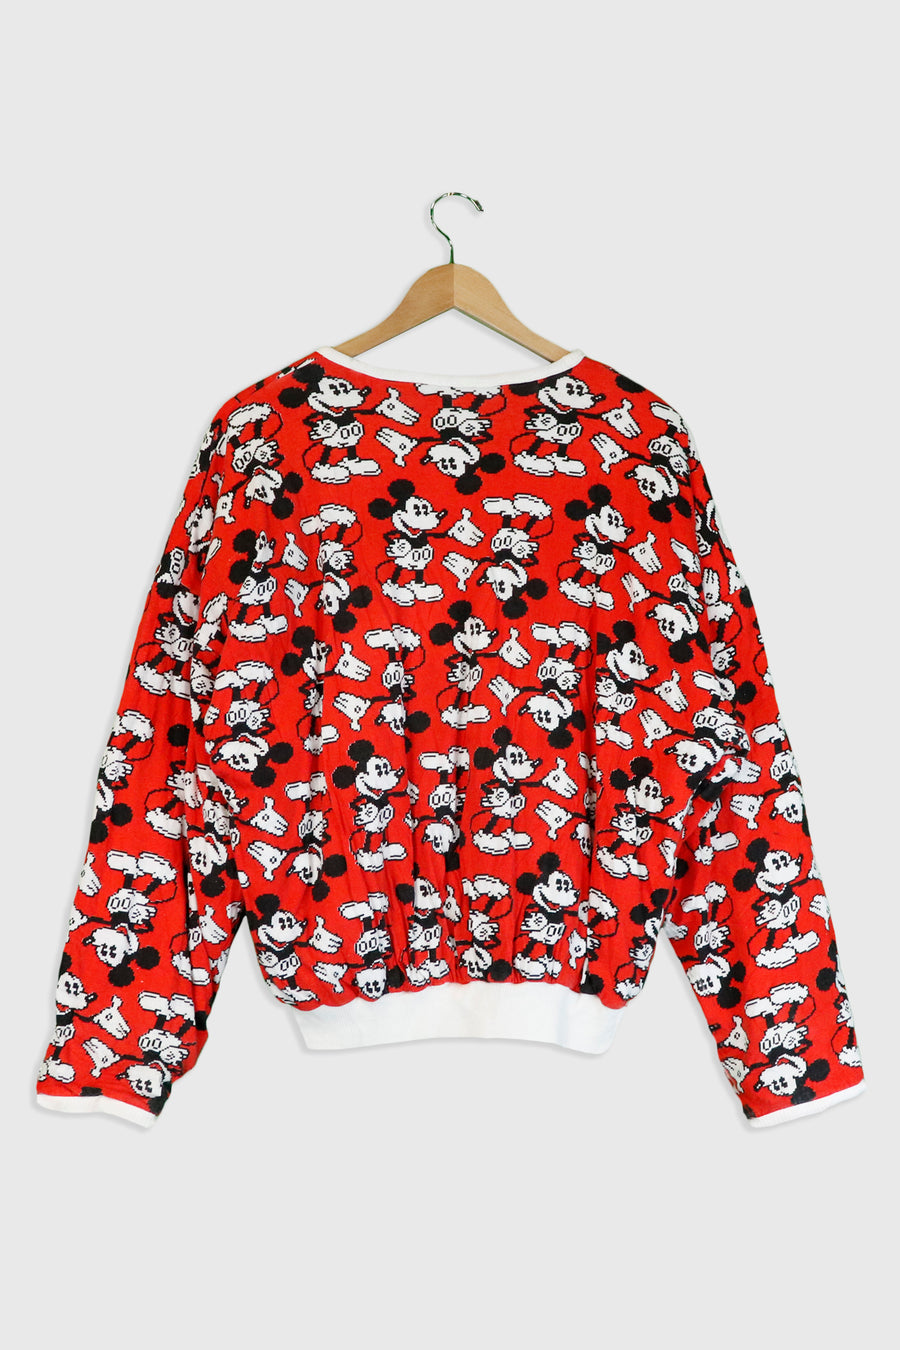 Vintage Pixelated Mickey Mouse Quilted Sweatshirt Sz XL